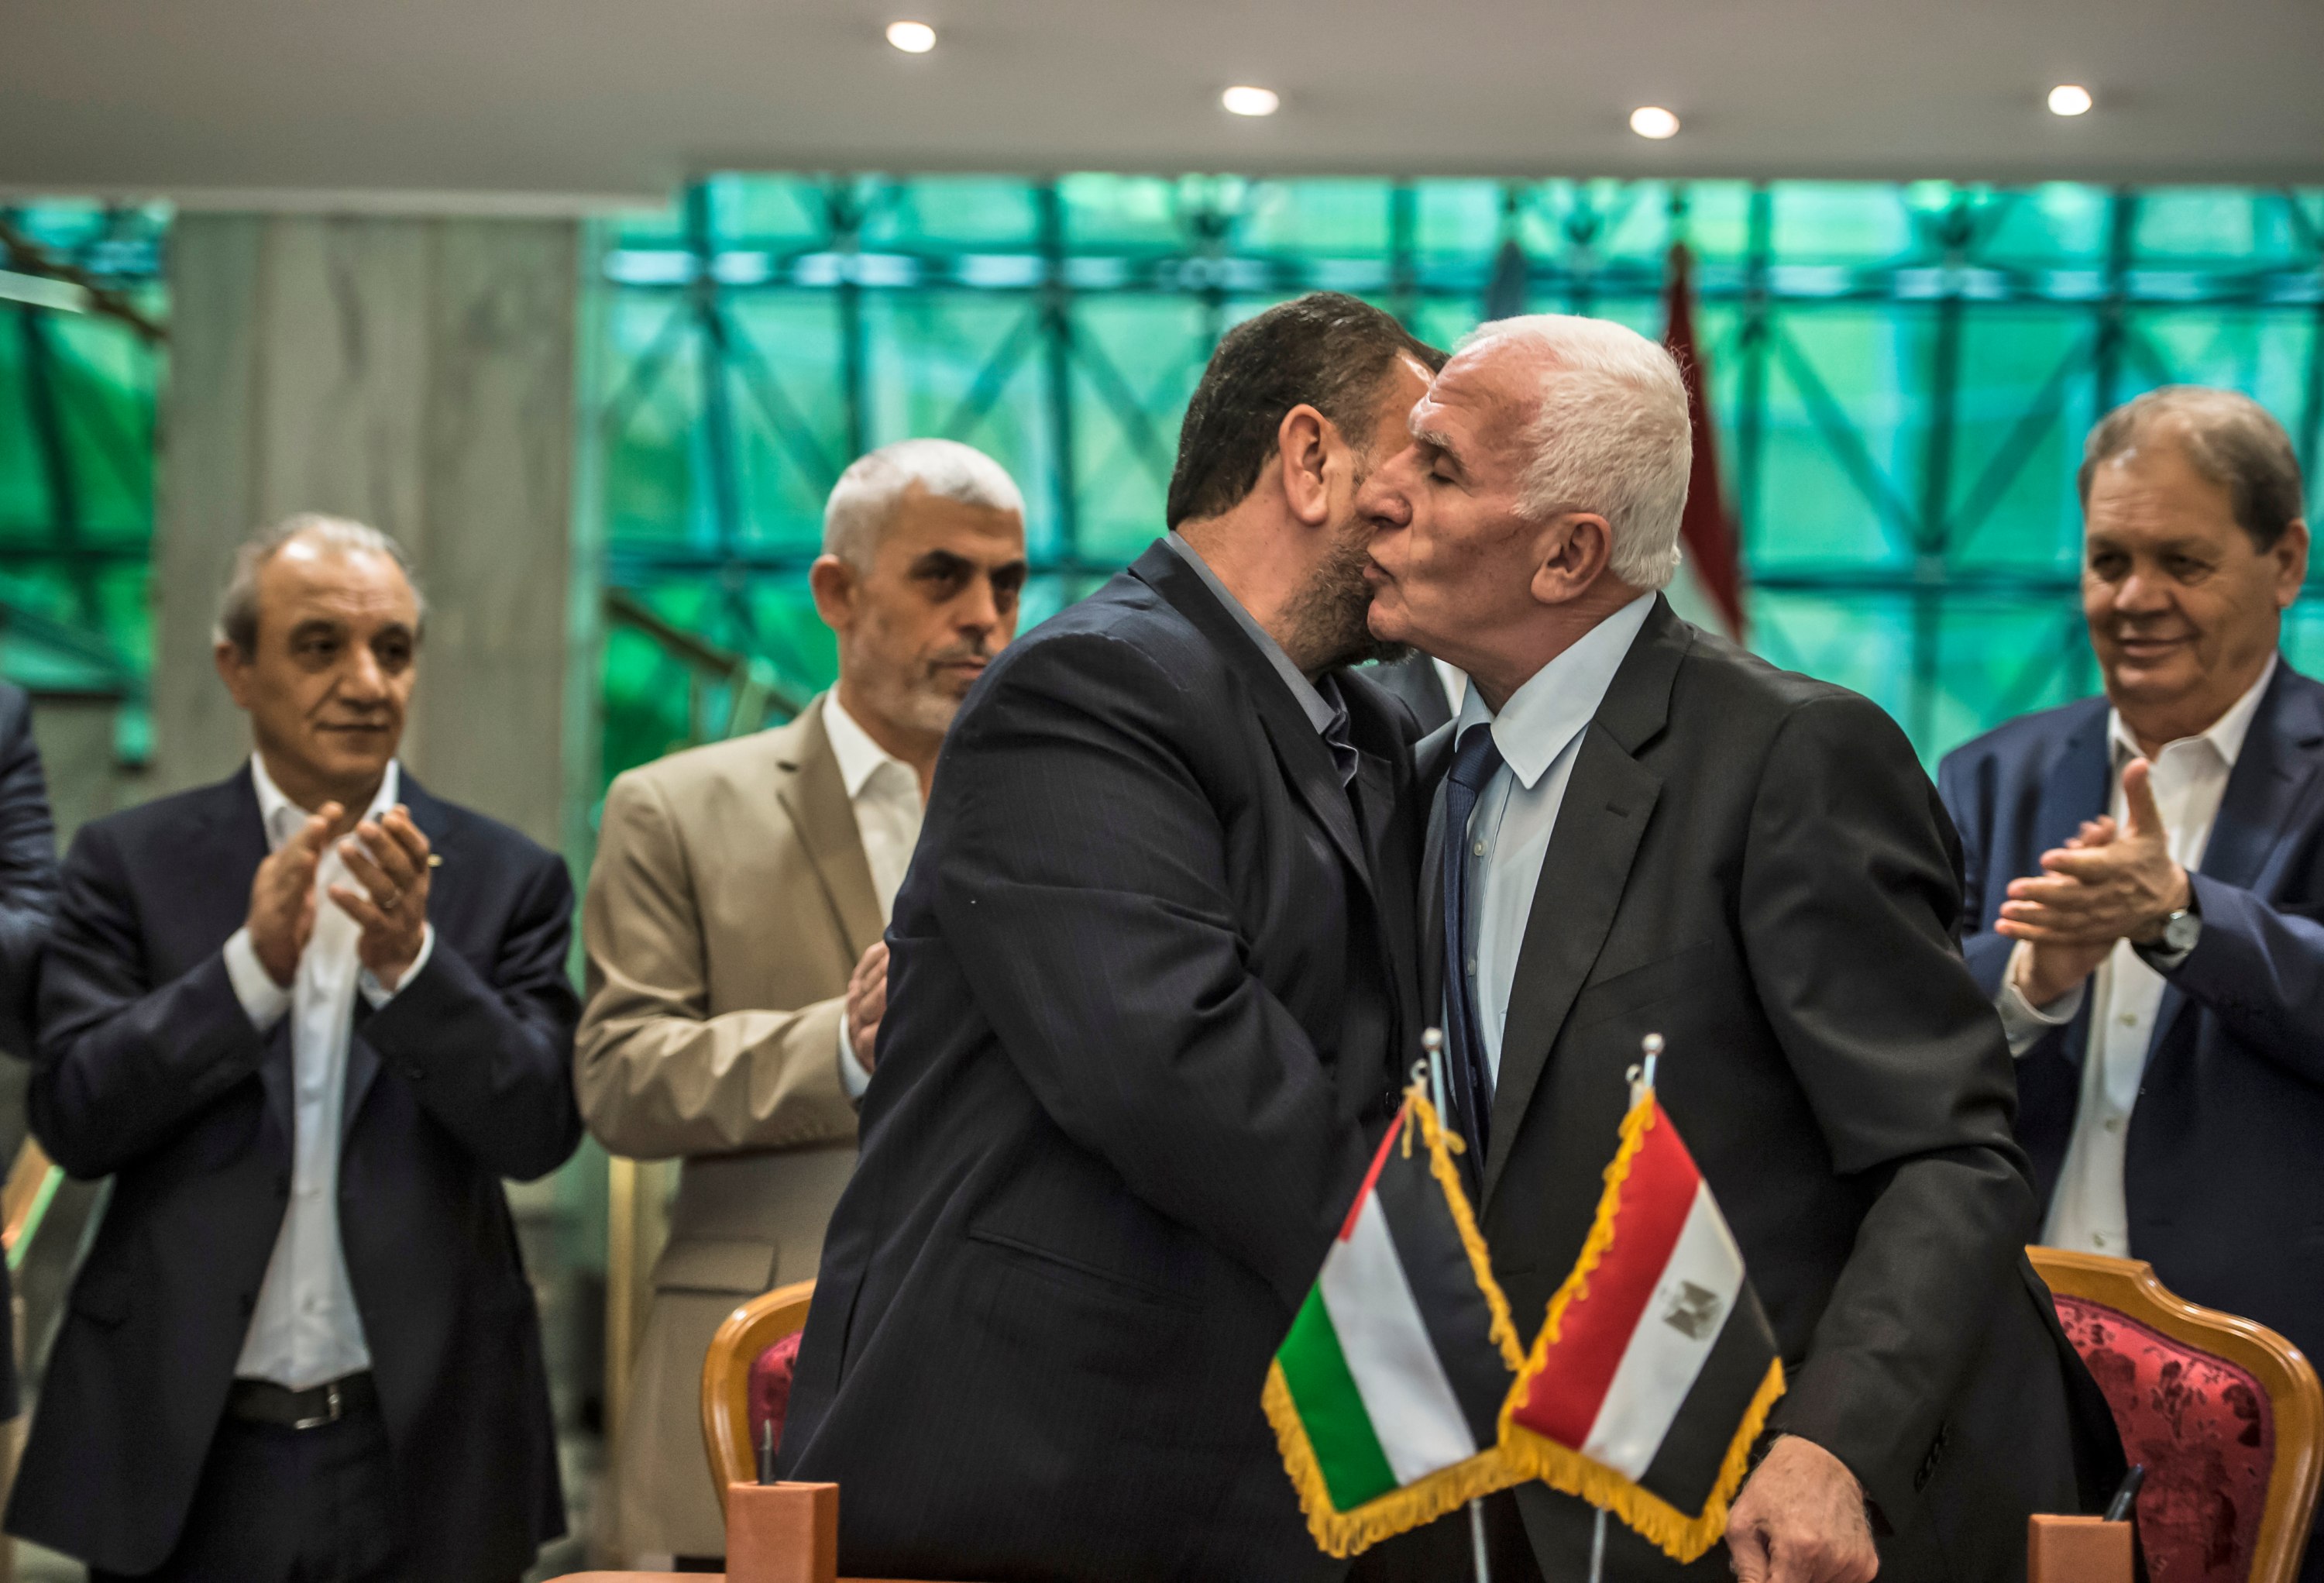 Fatah's Azzam al-Ahmad, right, and Saleh al-Aruri of Hamas kiss after signing a reconciliation deal in Cairo on 12 October 2017. The deal however failed to durably resolve the enmity between the two Palestinian parties (AFP)